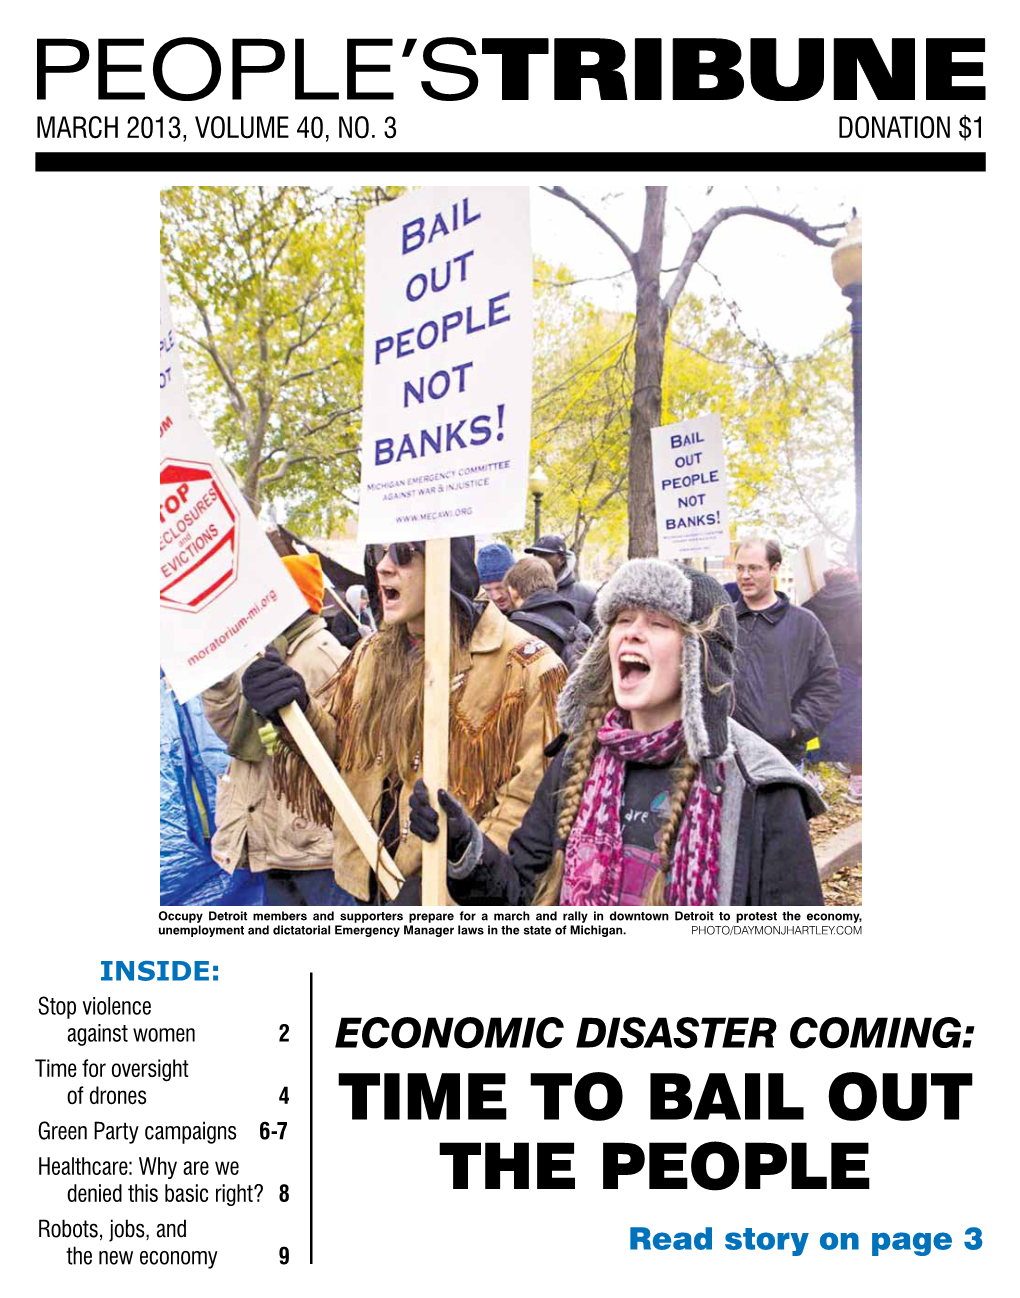 Time to Bail out the People COVER STORY